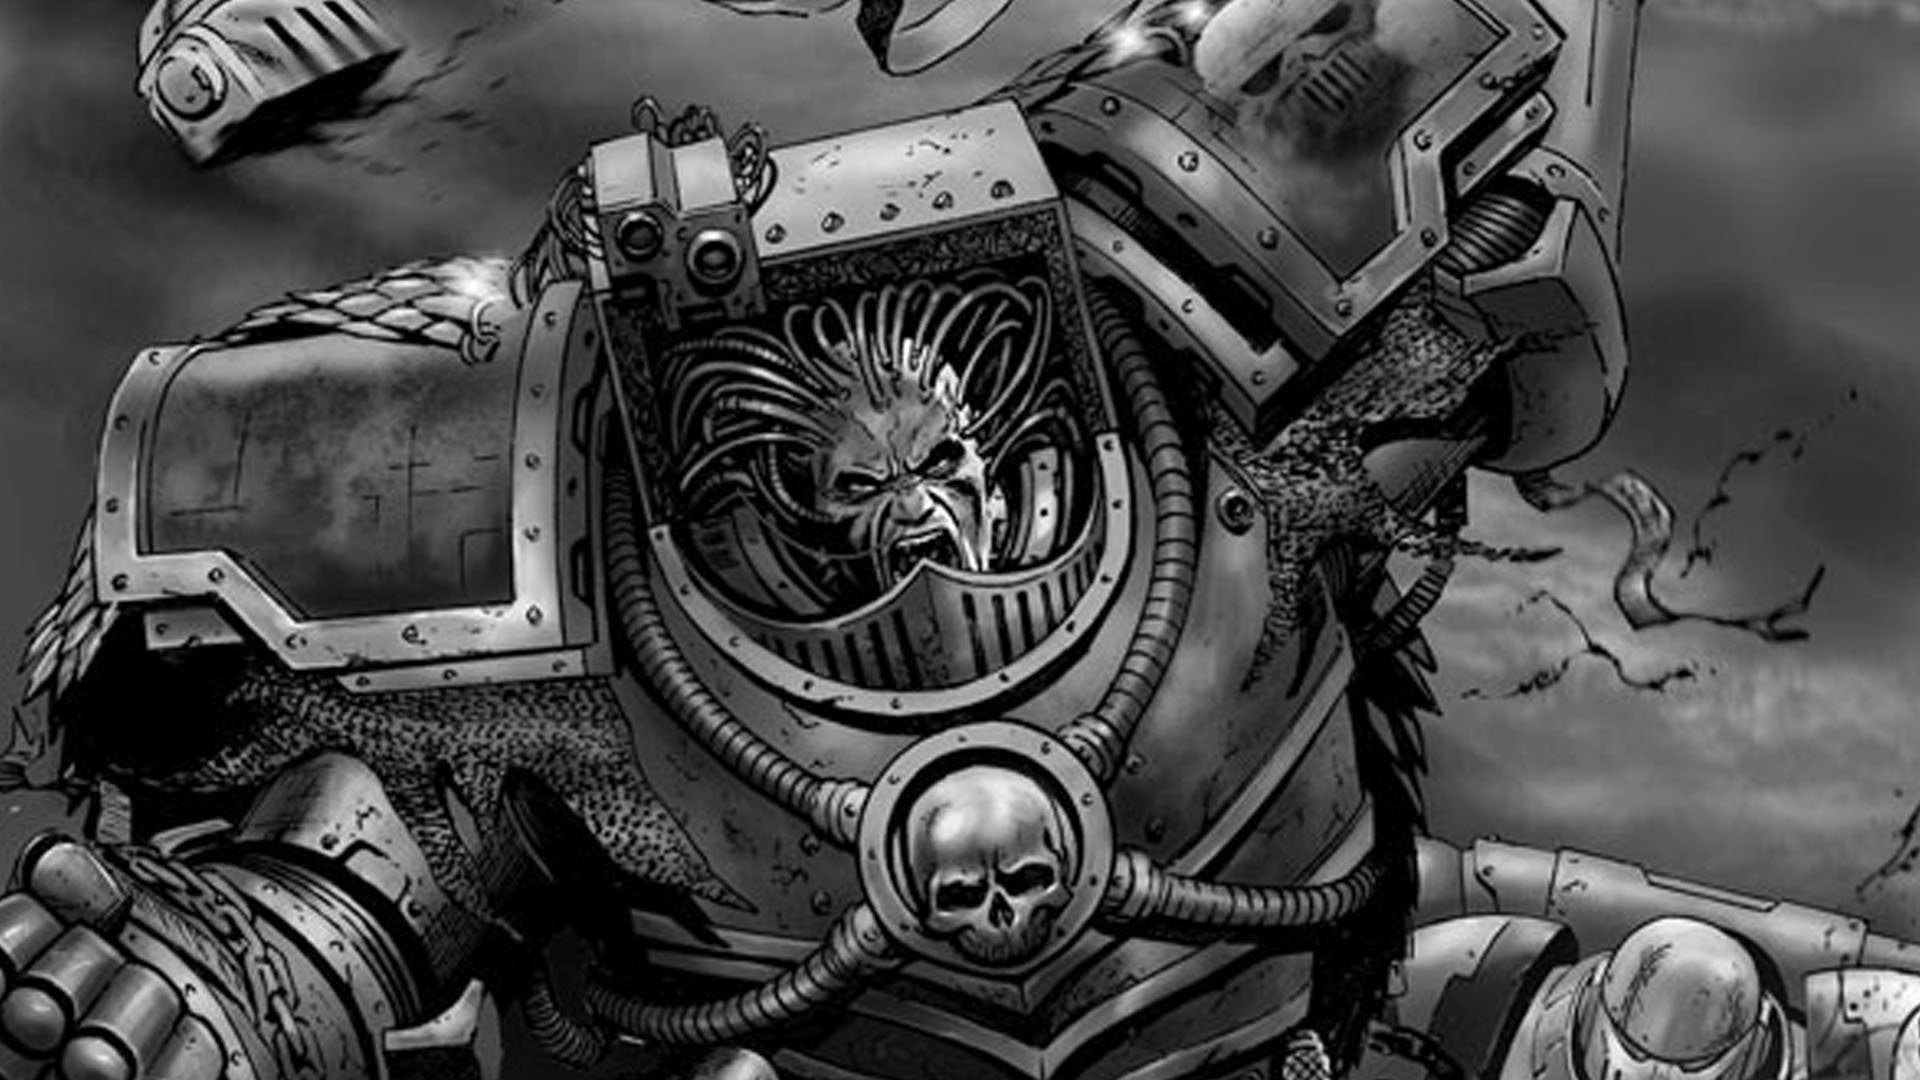 Warhammer 40k Perturabo guide - Games Workshop artwork showing Perturabo during the events of Angel Exterminatus